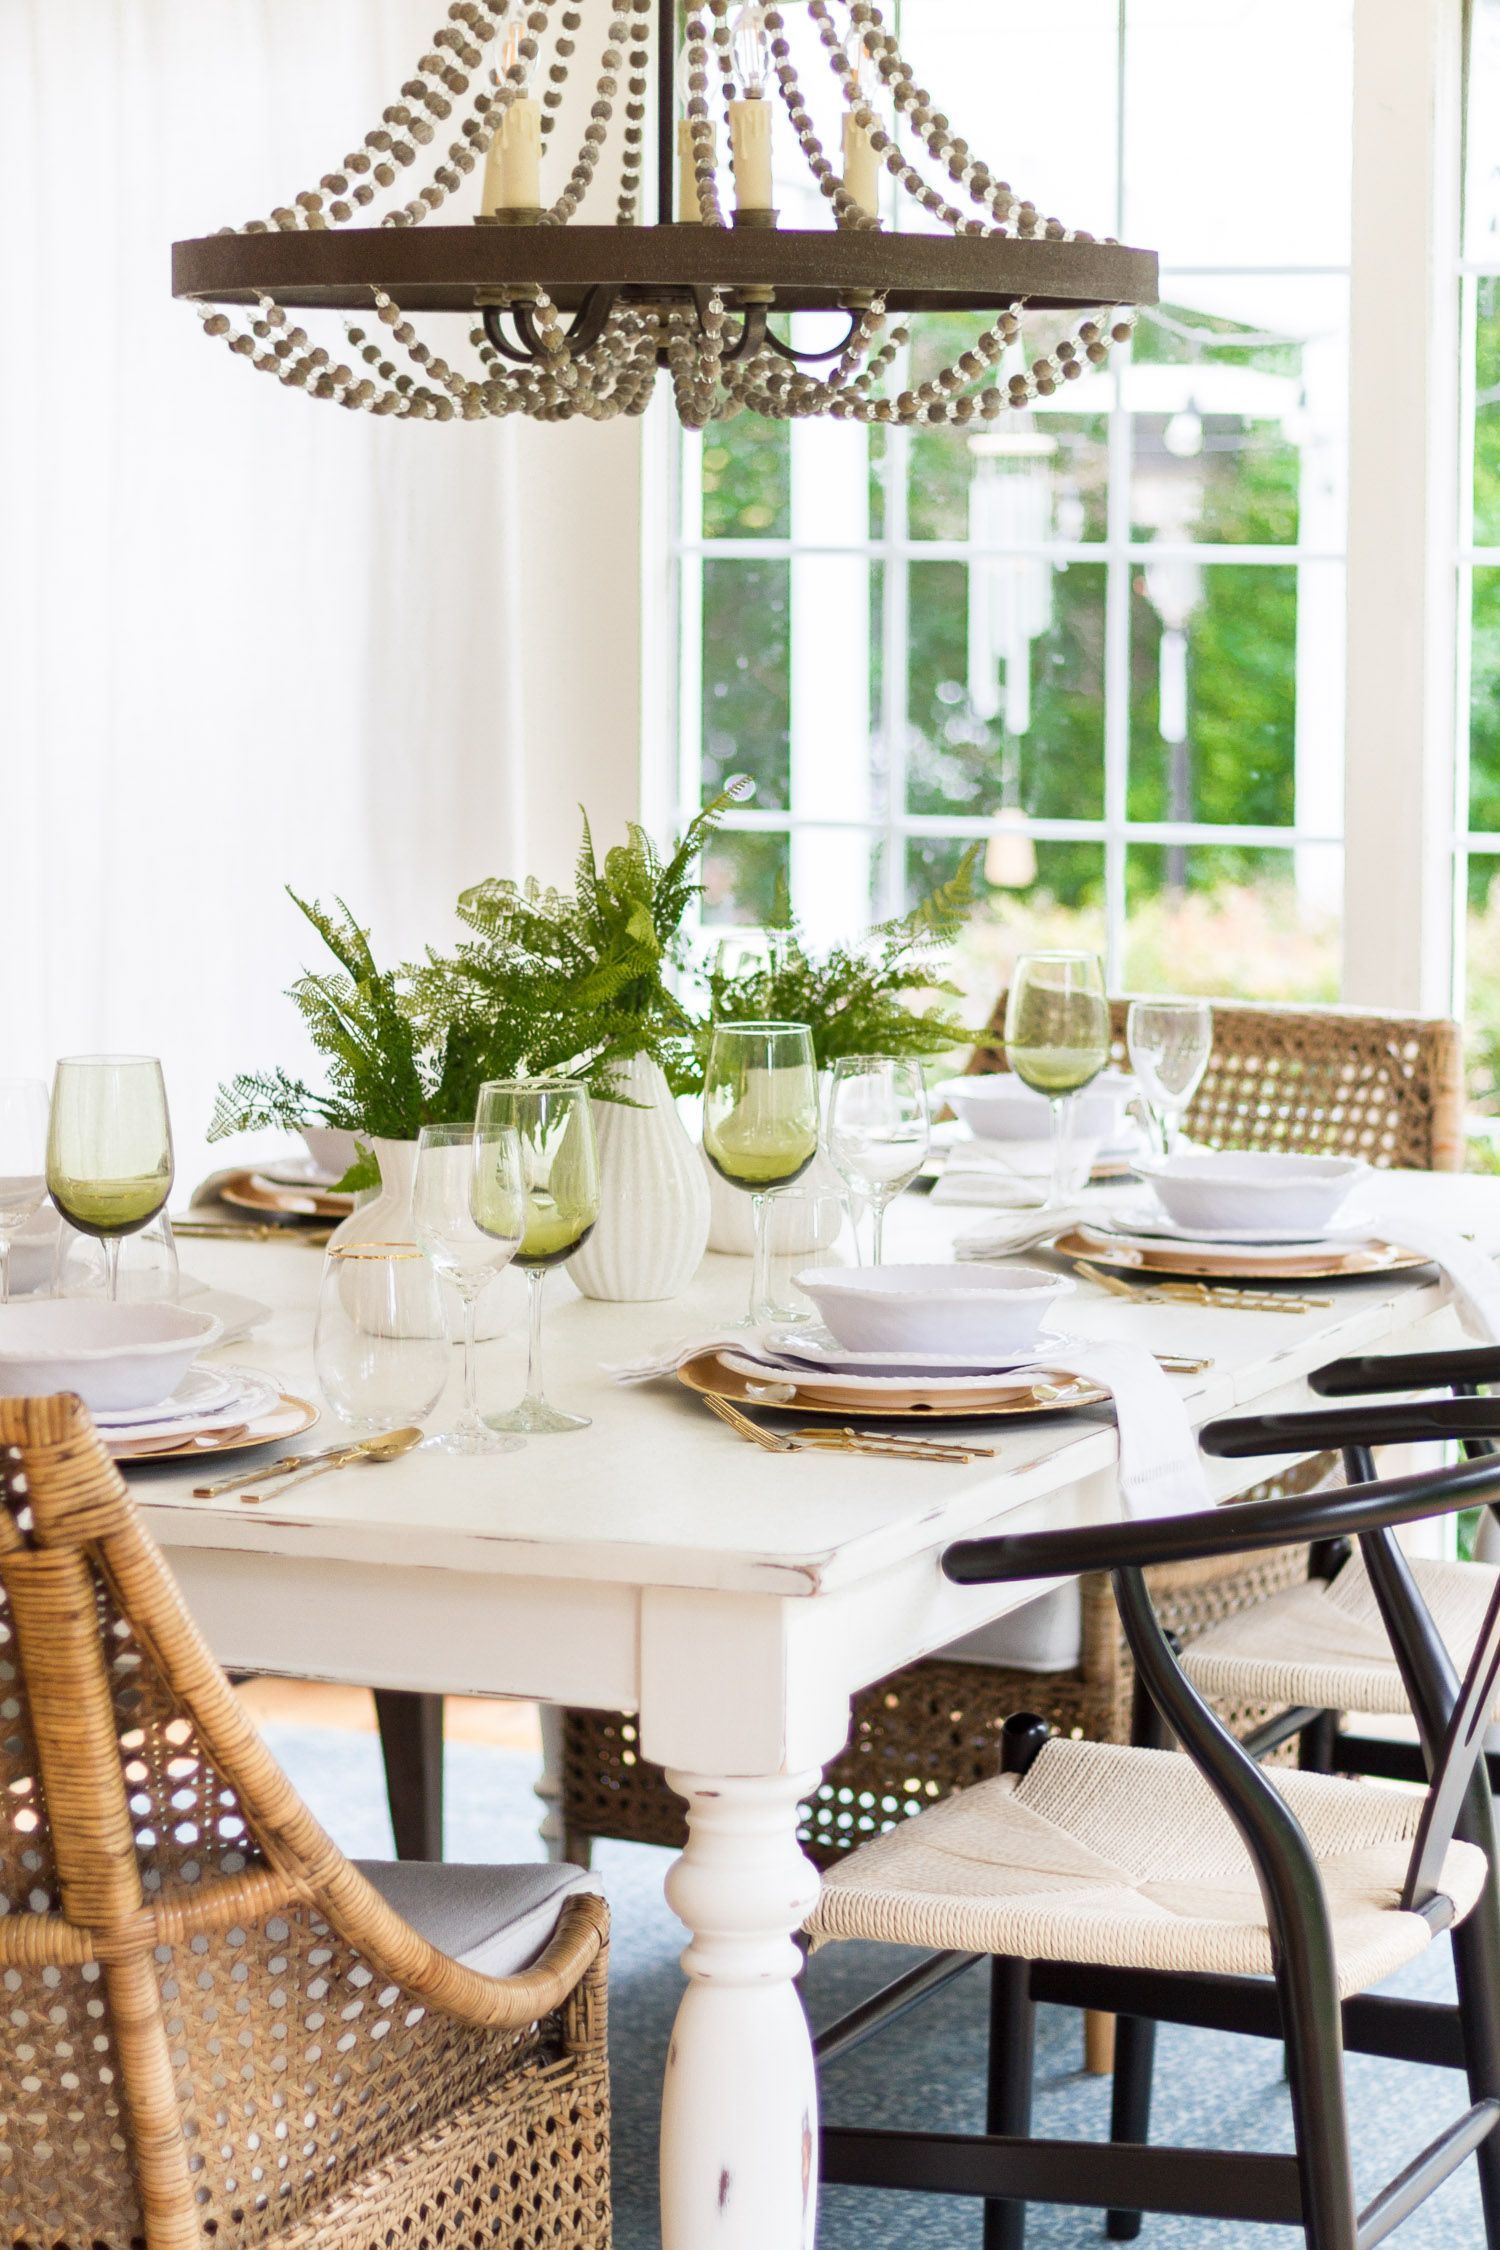 Styled + Set -   22 casual dining decor
 ideas